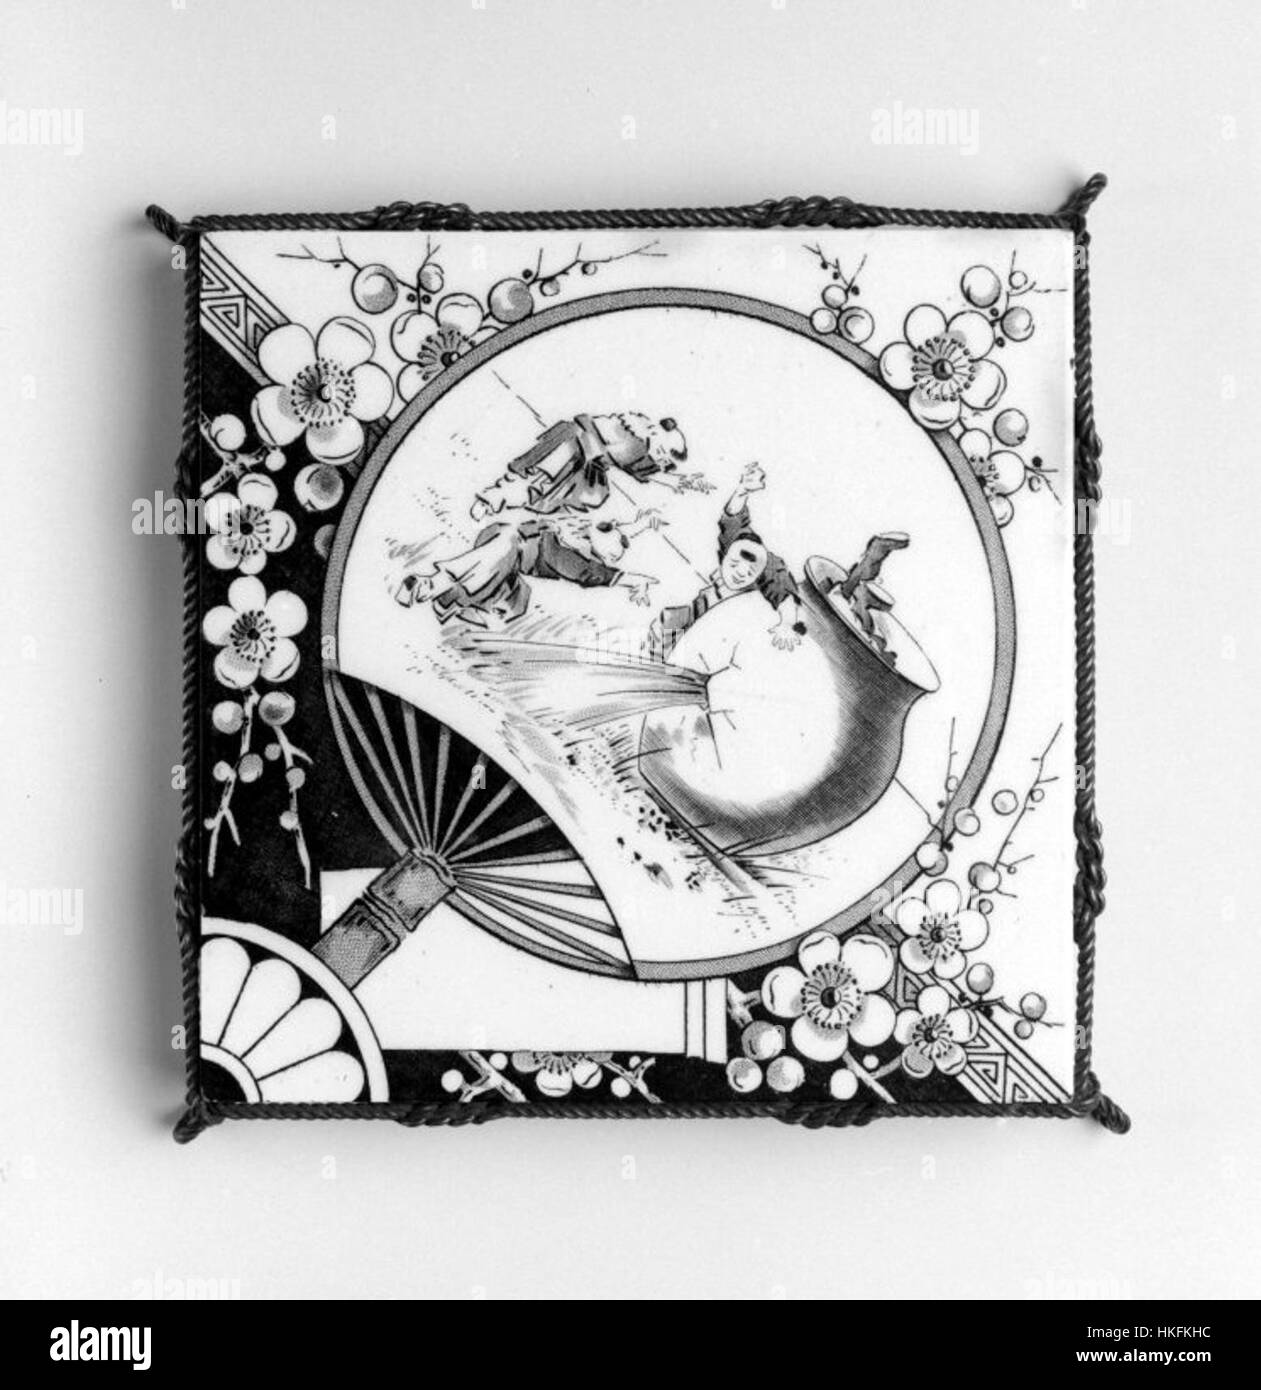 Brooklyn Museum   Tile in Metal Trivet Mount   International Tile Company   overall Stock Photo